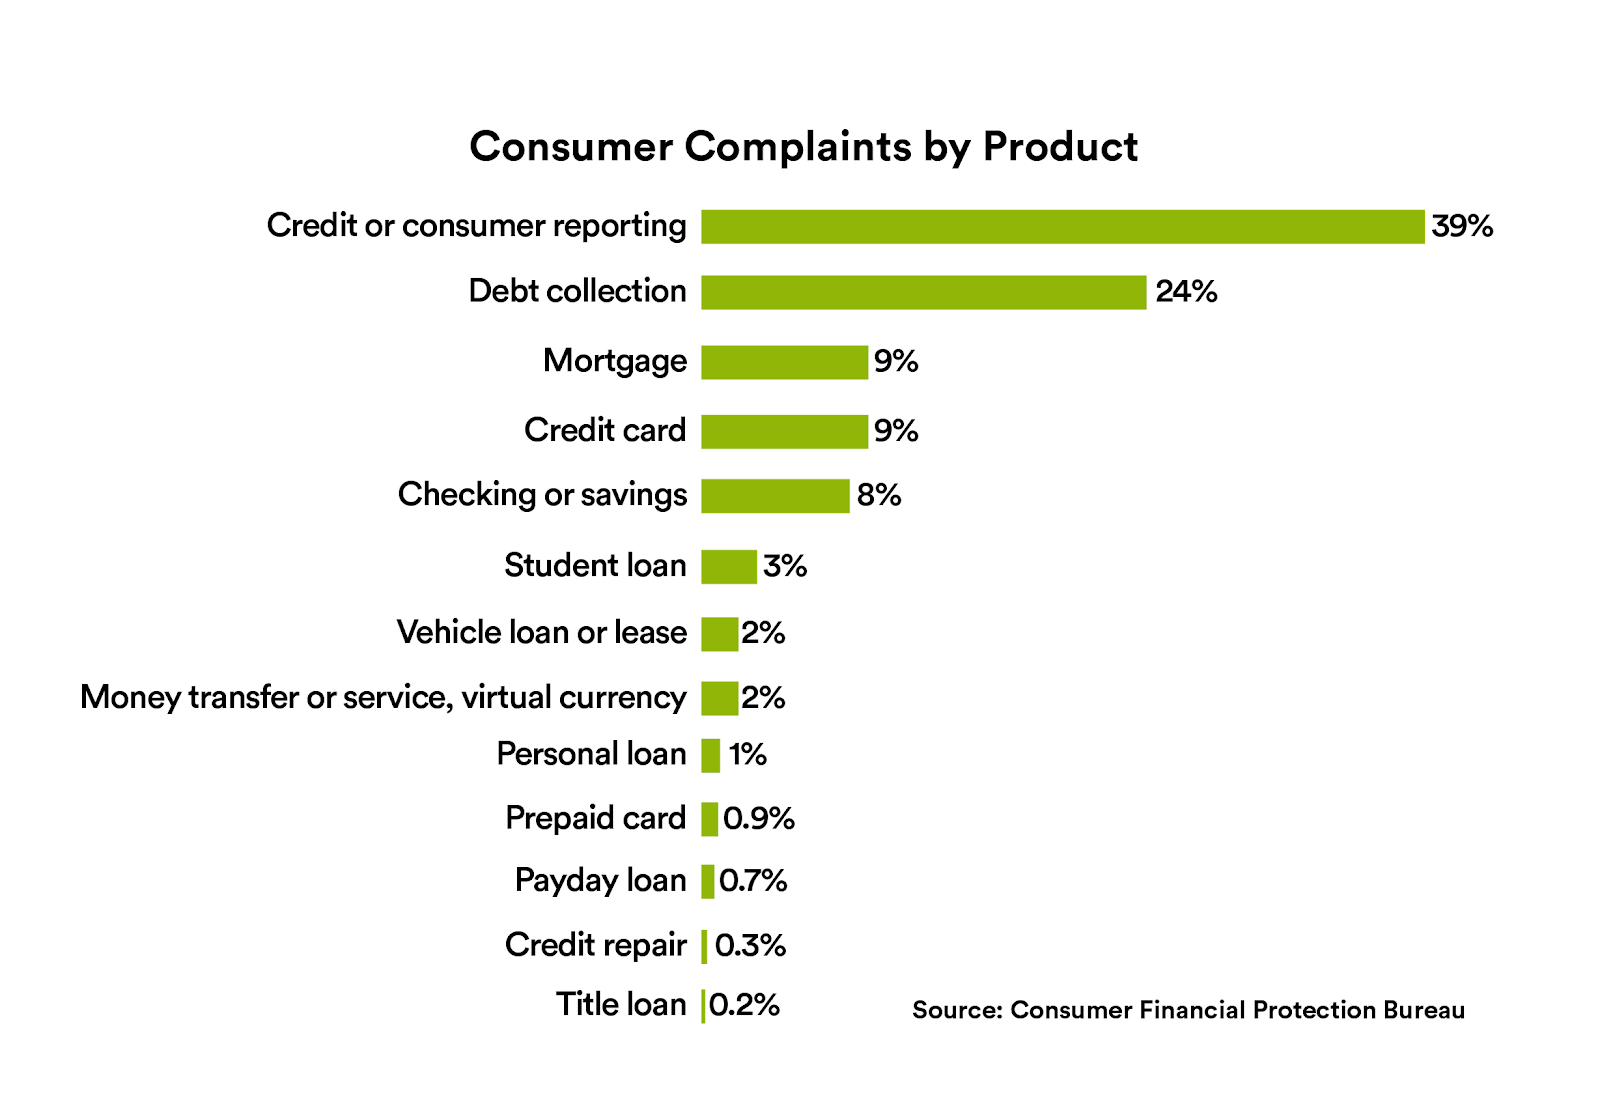 Consumer complaints by product